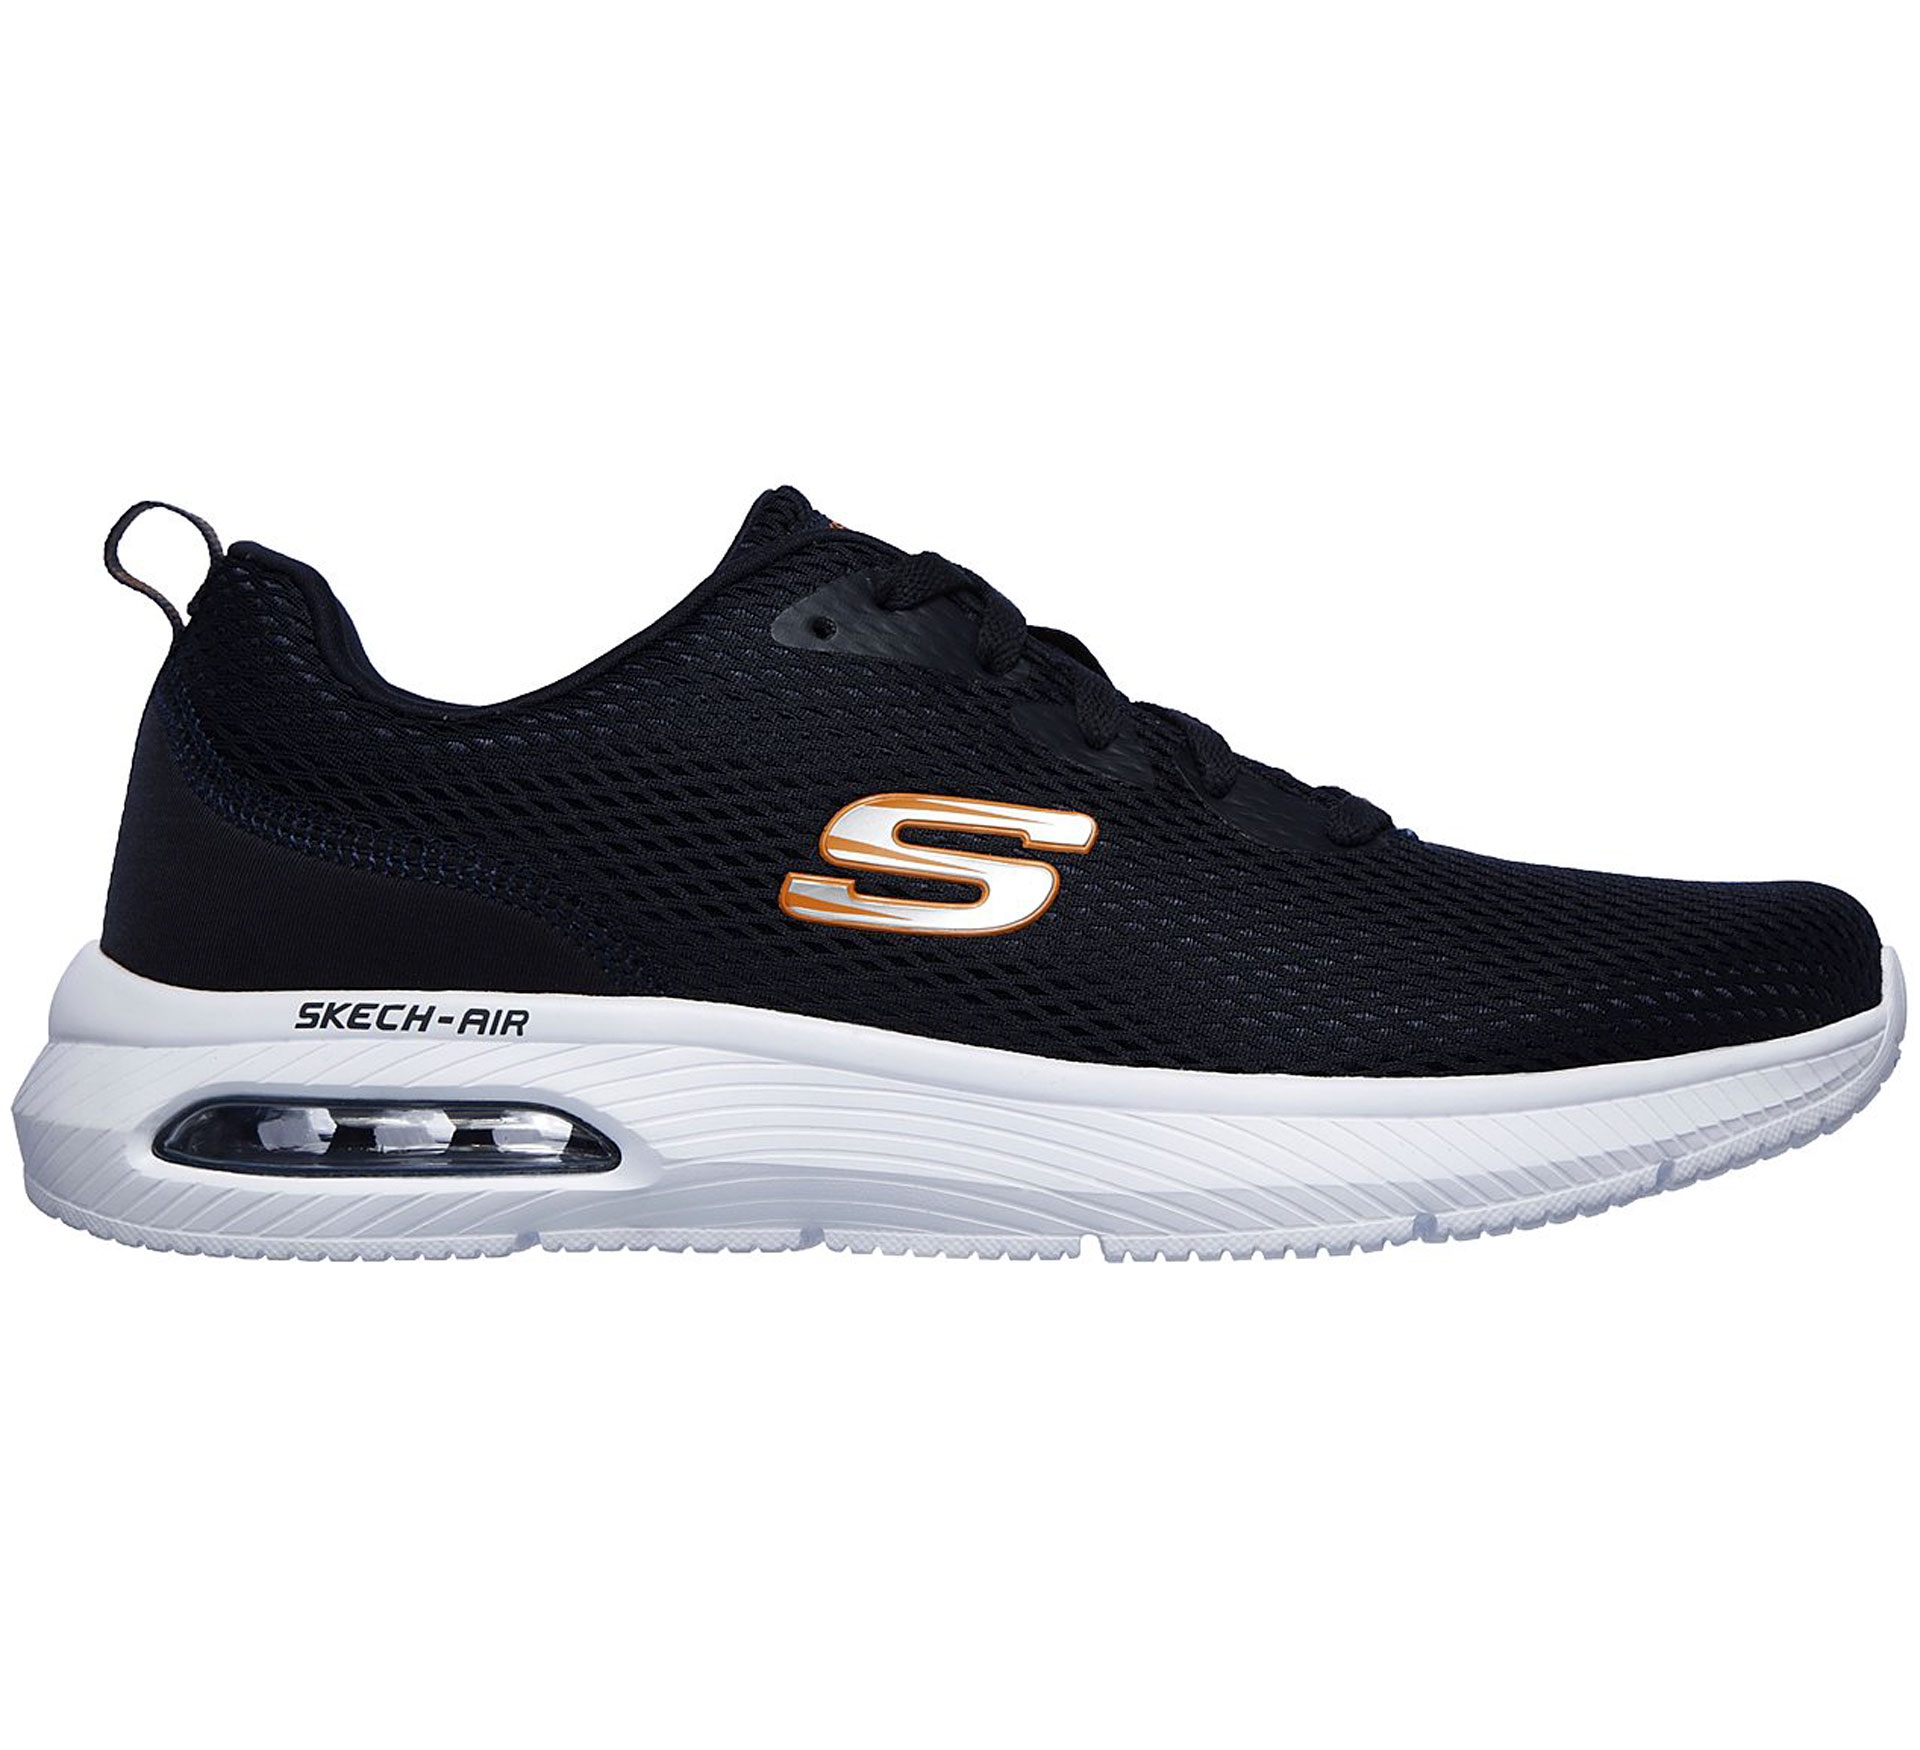 Baskets Skechers Dyna Air Homme